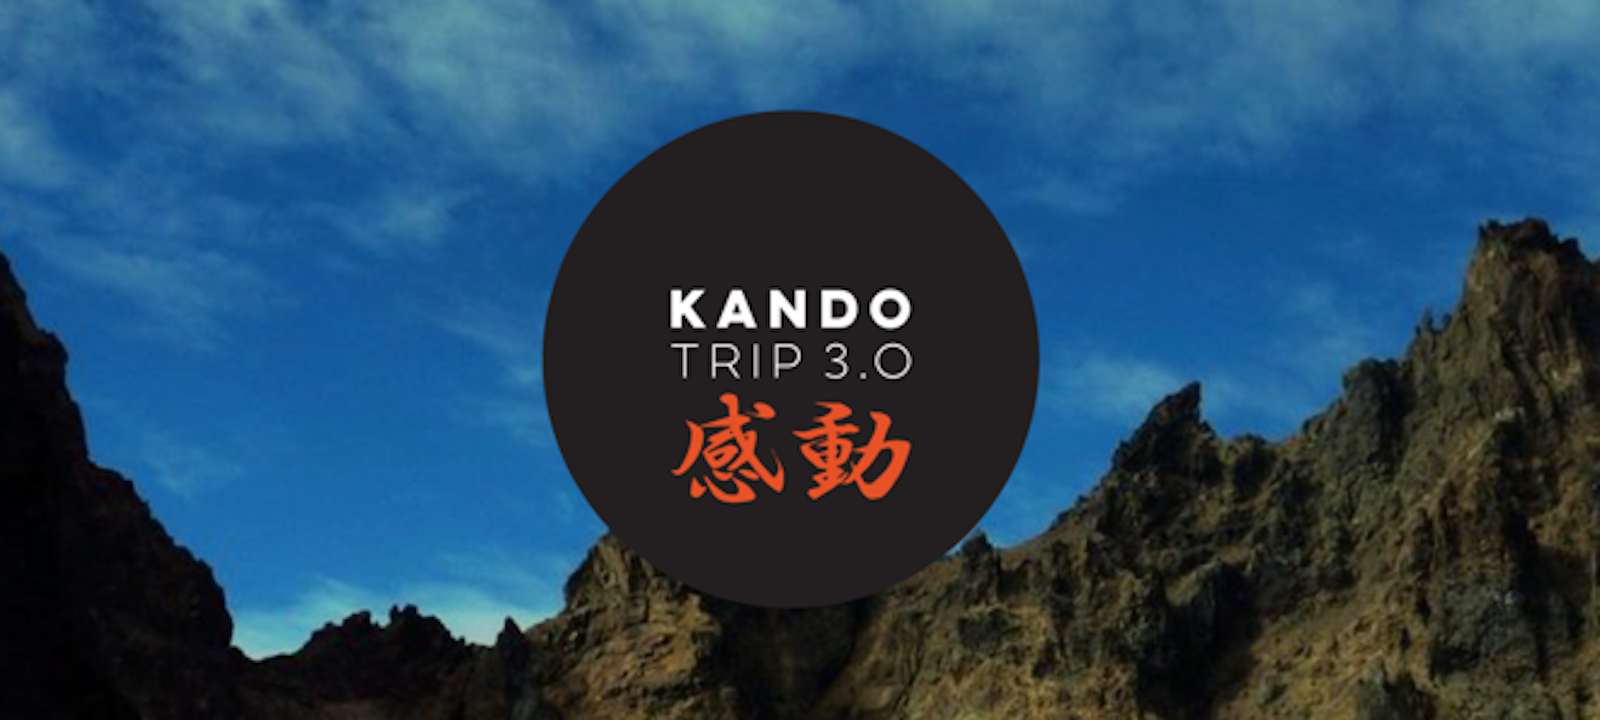 Next Stop is Kando Trip in Sun River Sony Mirrorless Pro